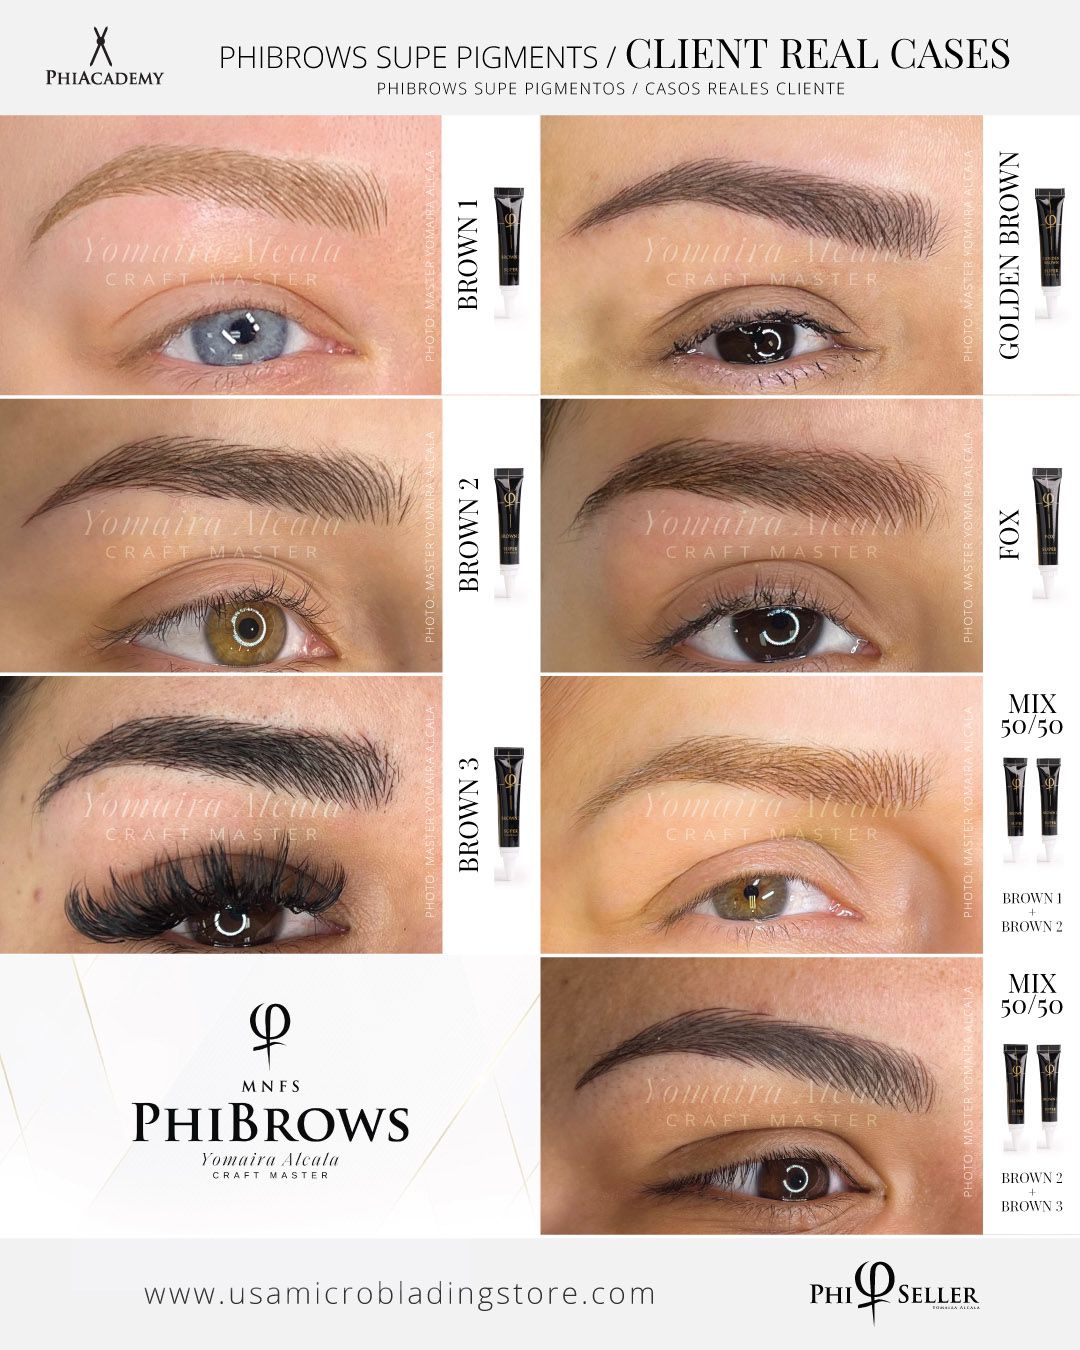 PHIBROWS BROWN 1 SUPER